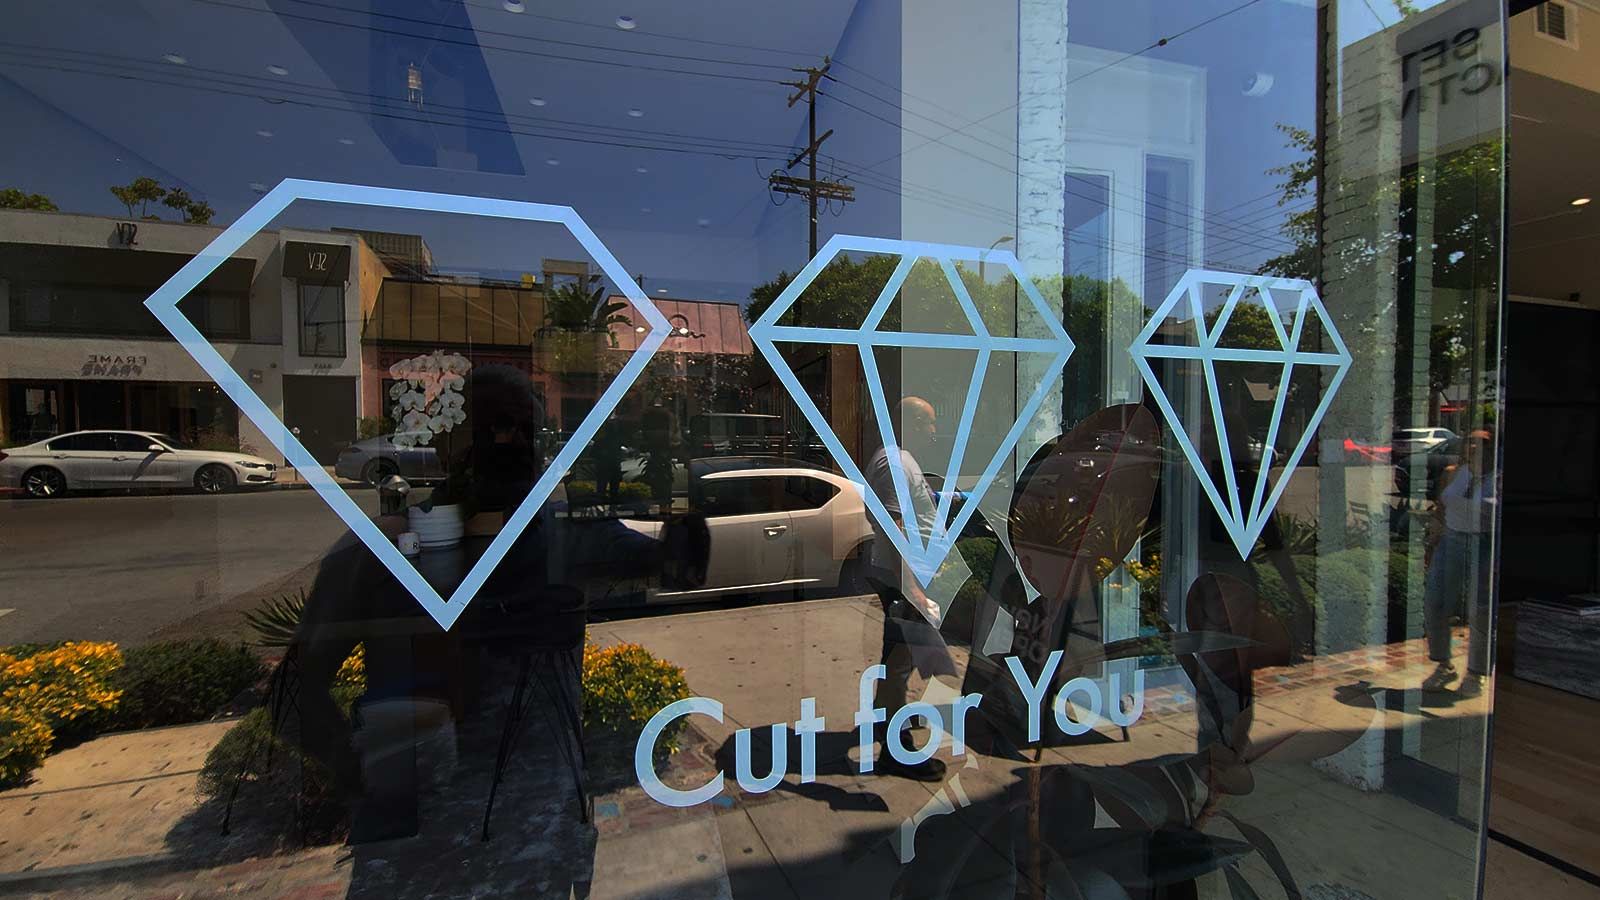 Appealing vinyl lettering applied to the storefront window